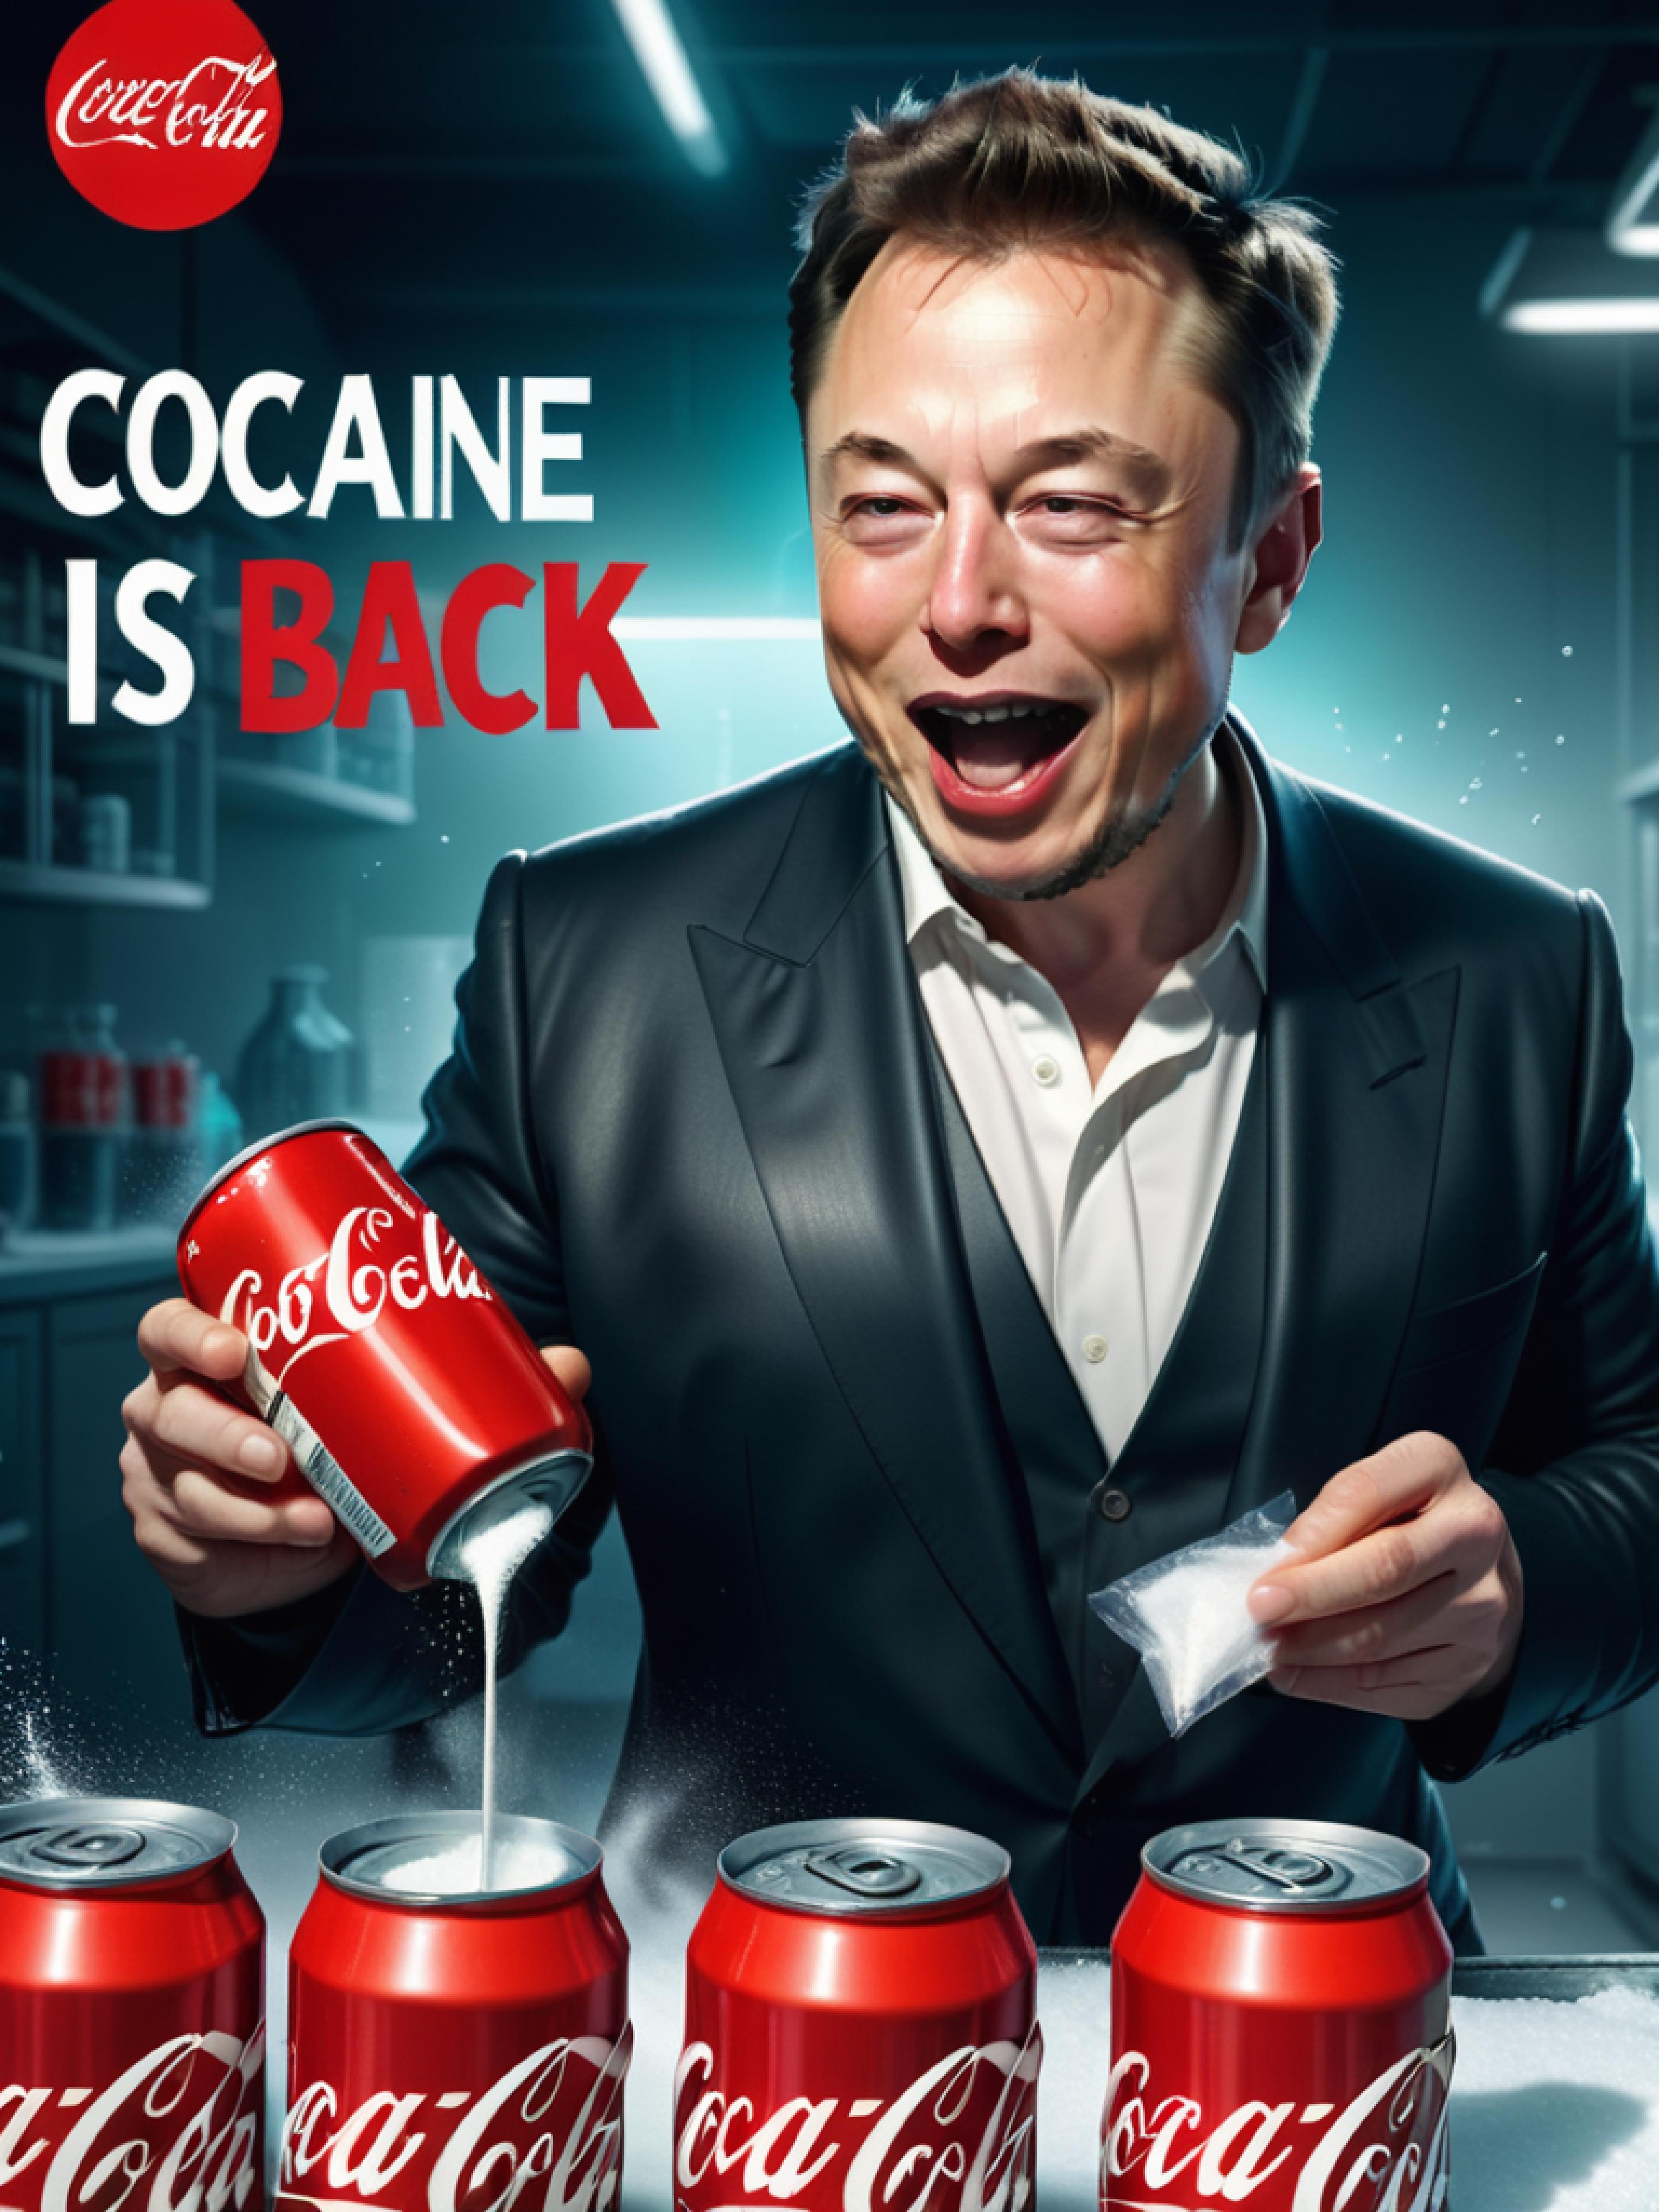 An advertisement for Coca-Cola featuring a smiling man in a suit.